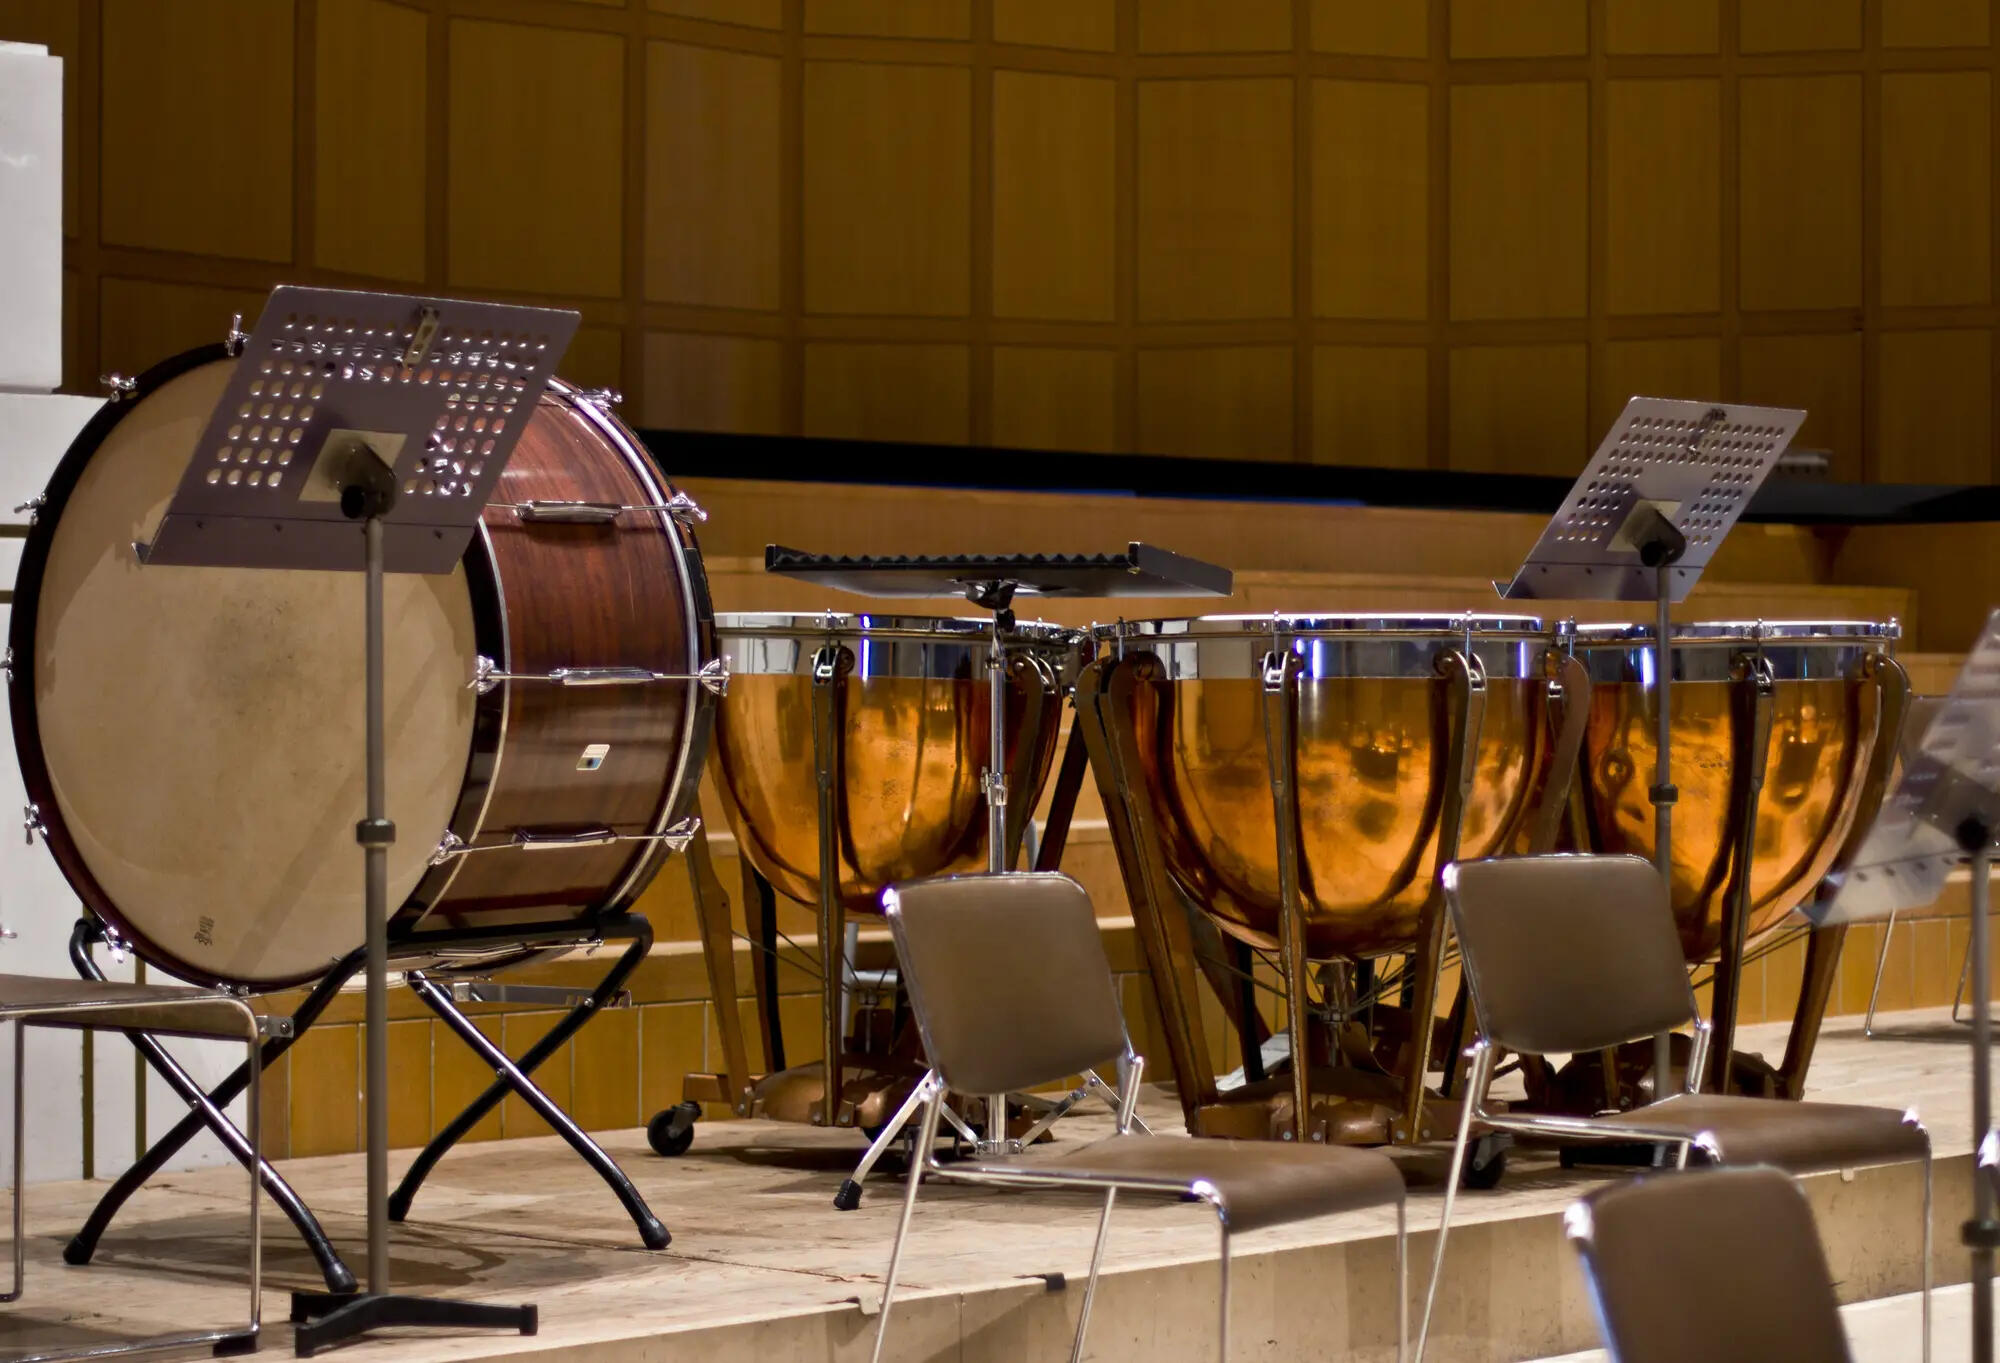 What Is The Single Drum Called In An Orchestra?